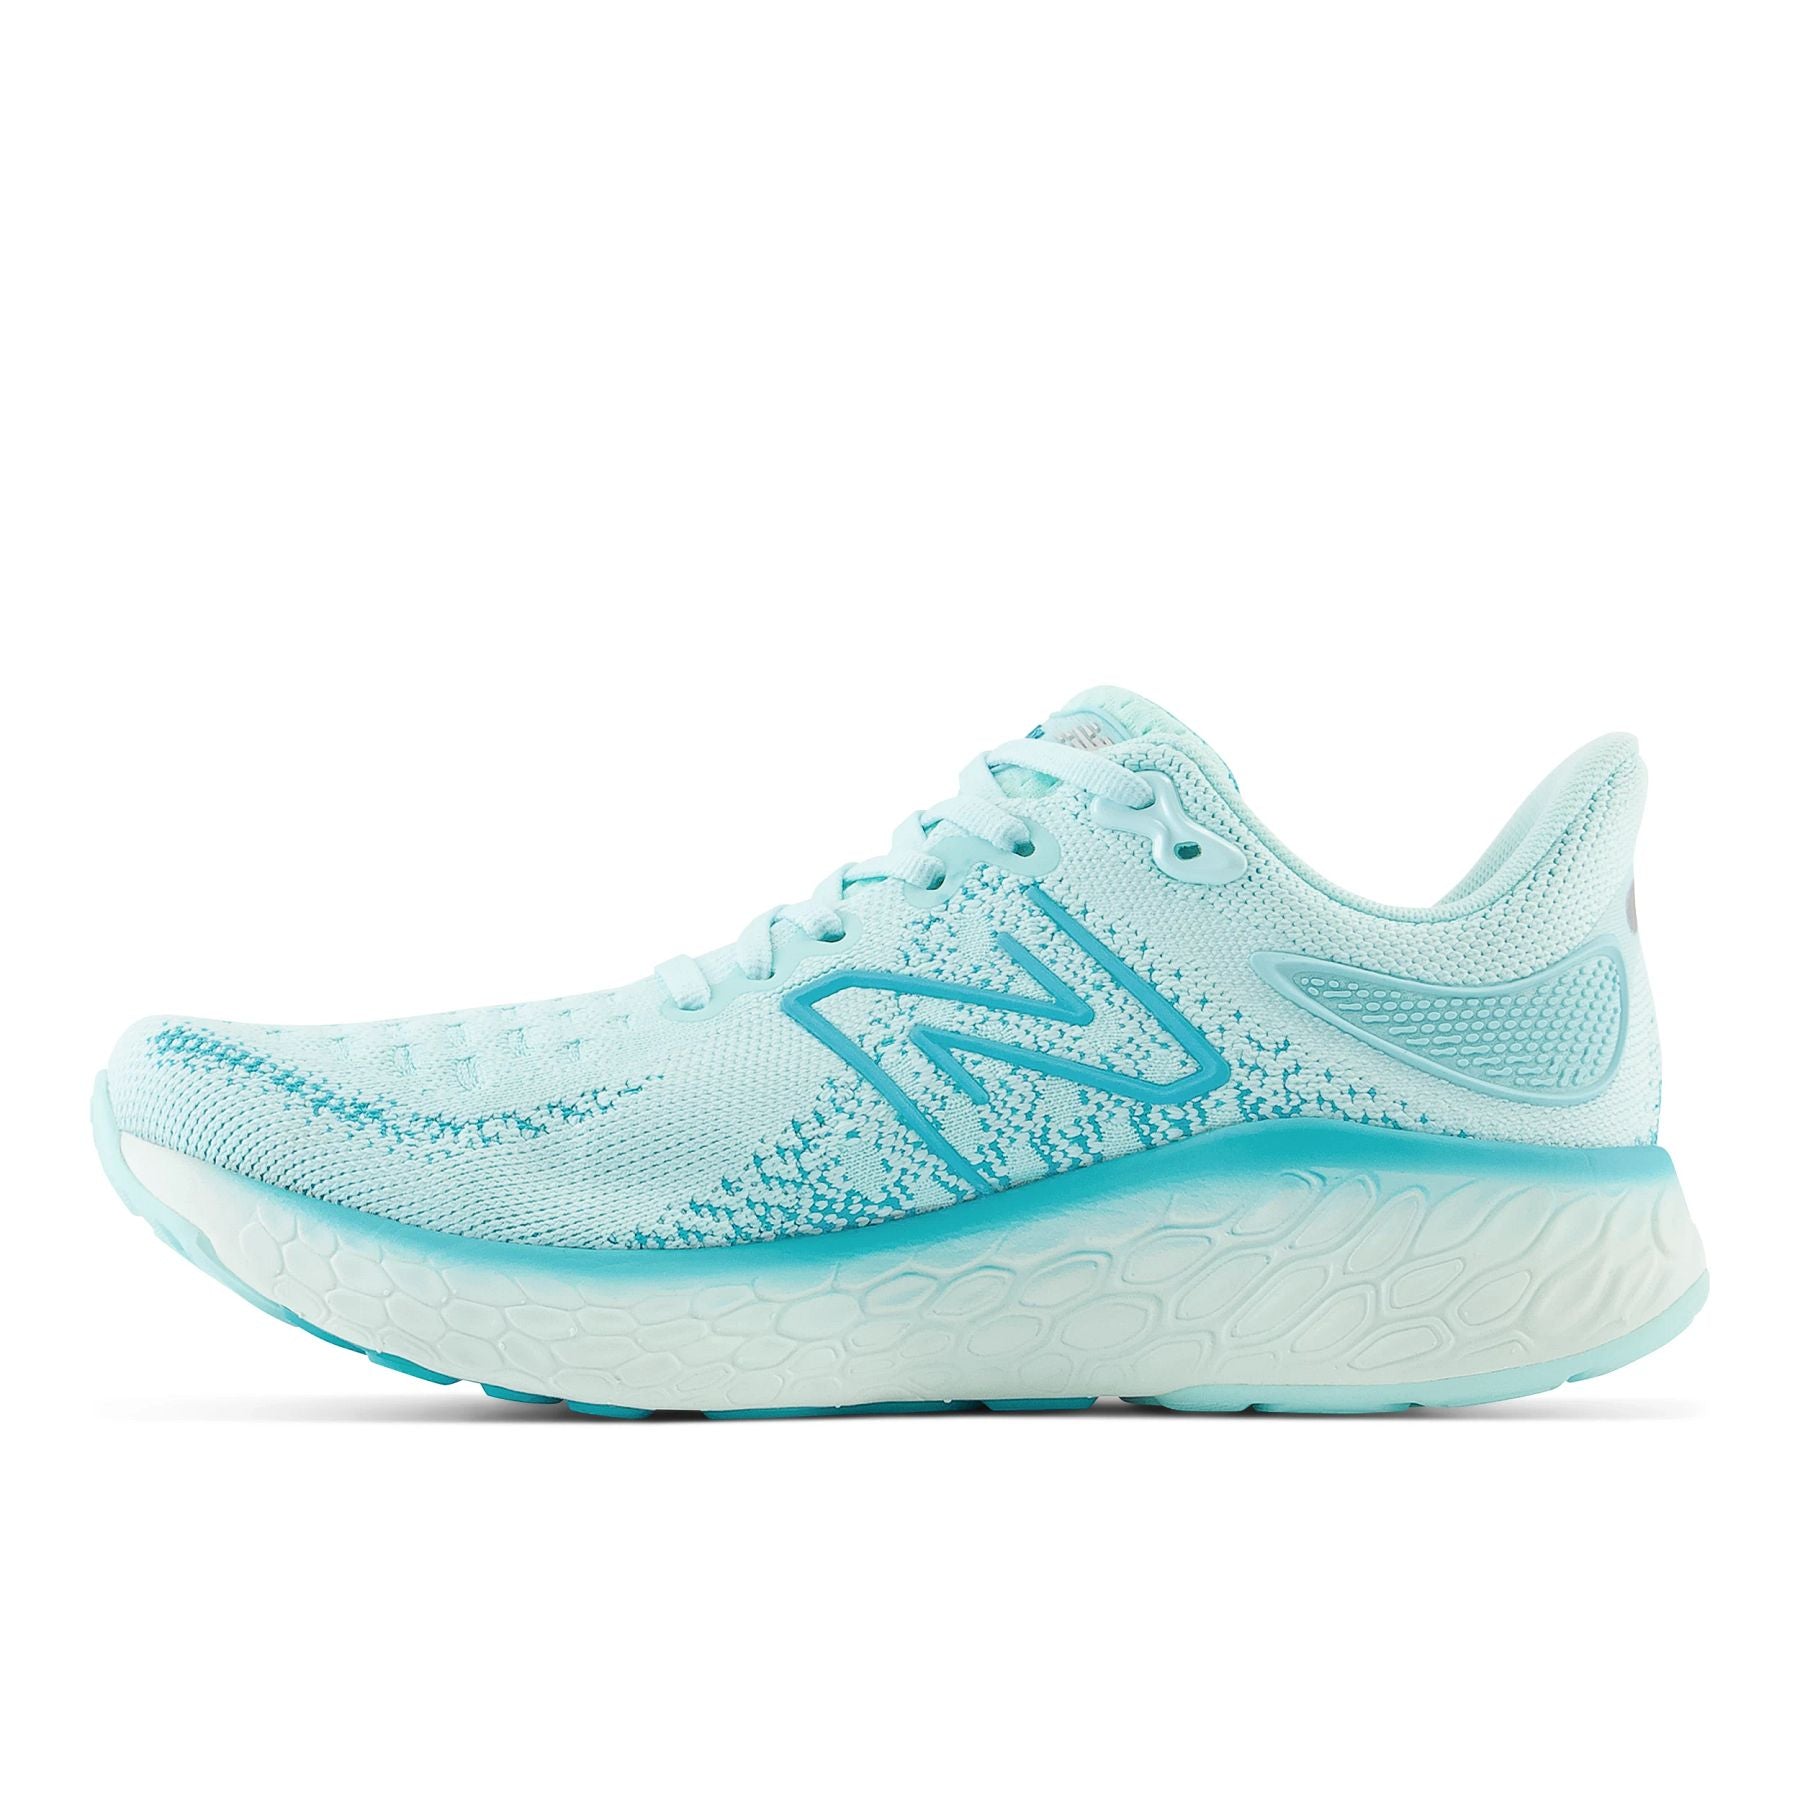 Medial view of the Women's 1080 V12 by New Balance in the color Bright Cyan/Virtual Blue